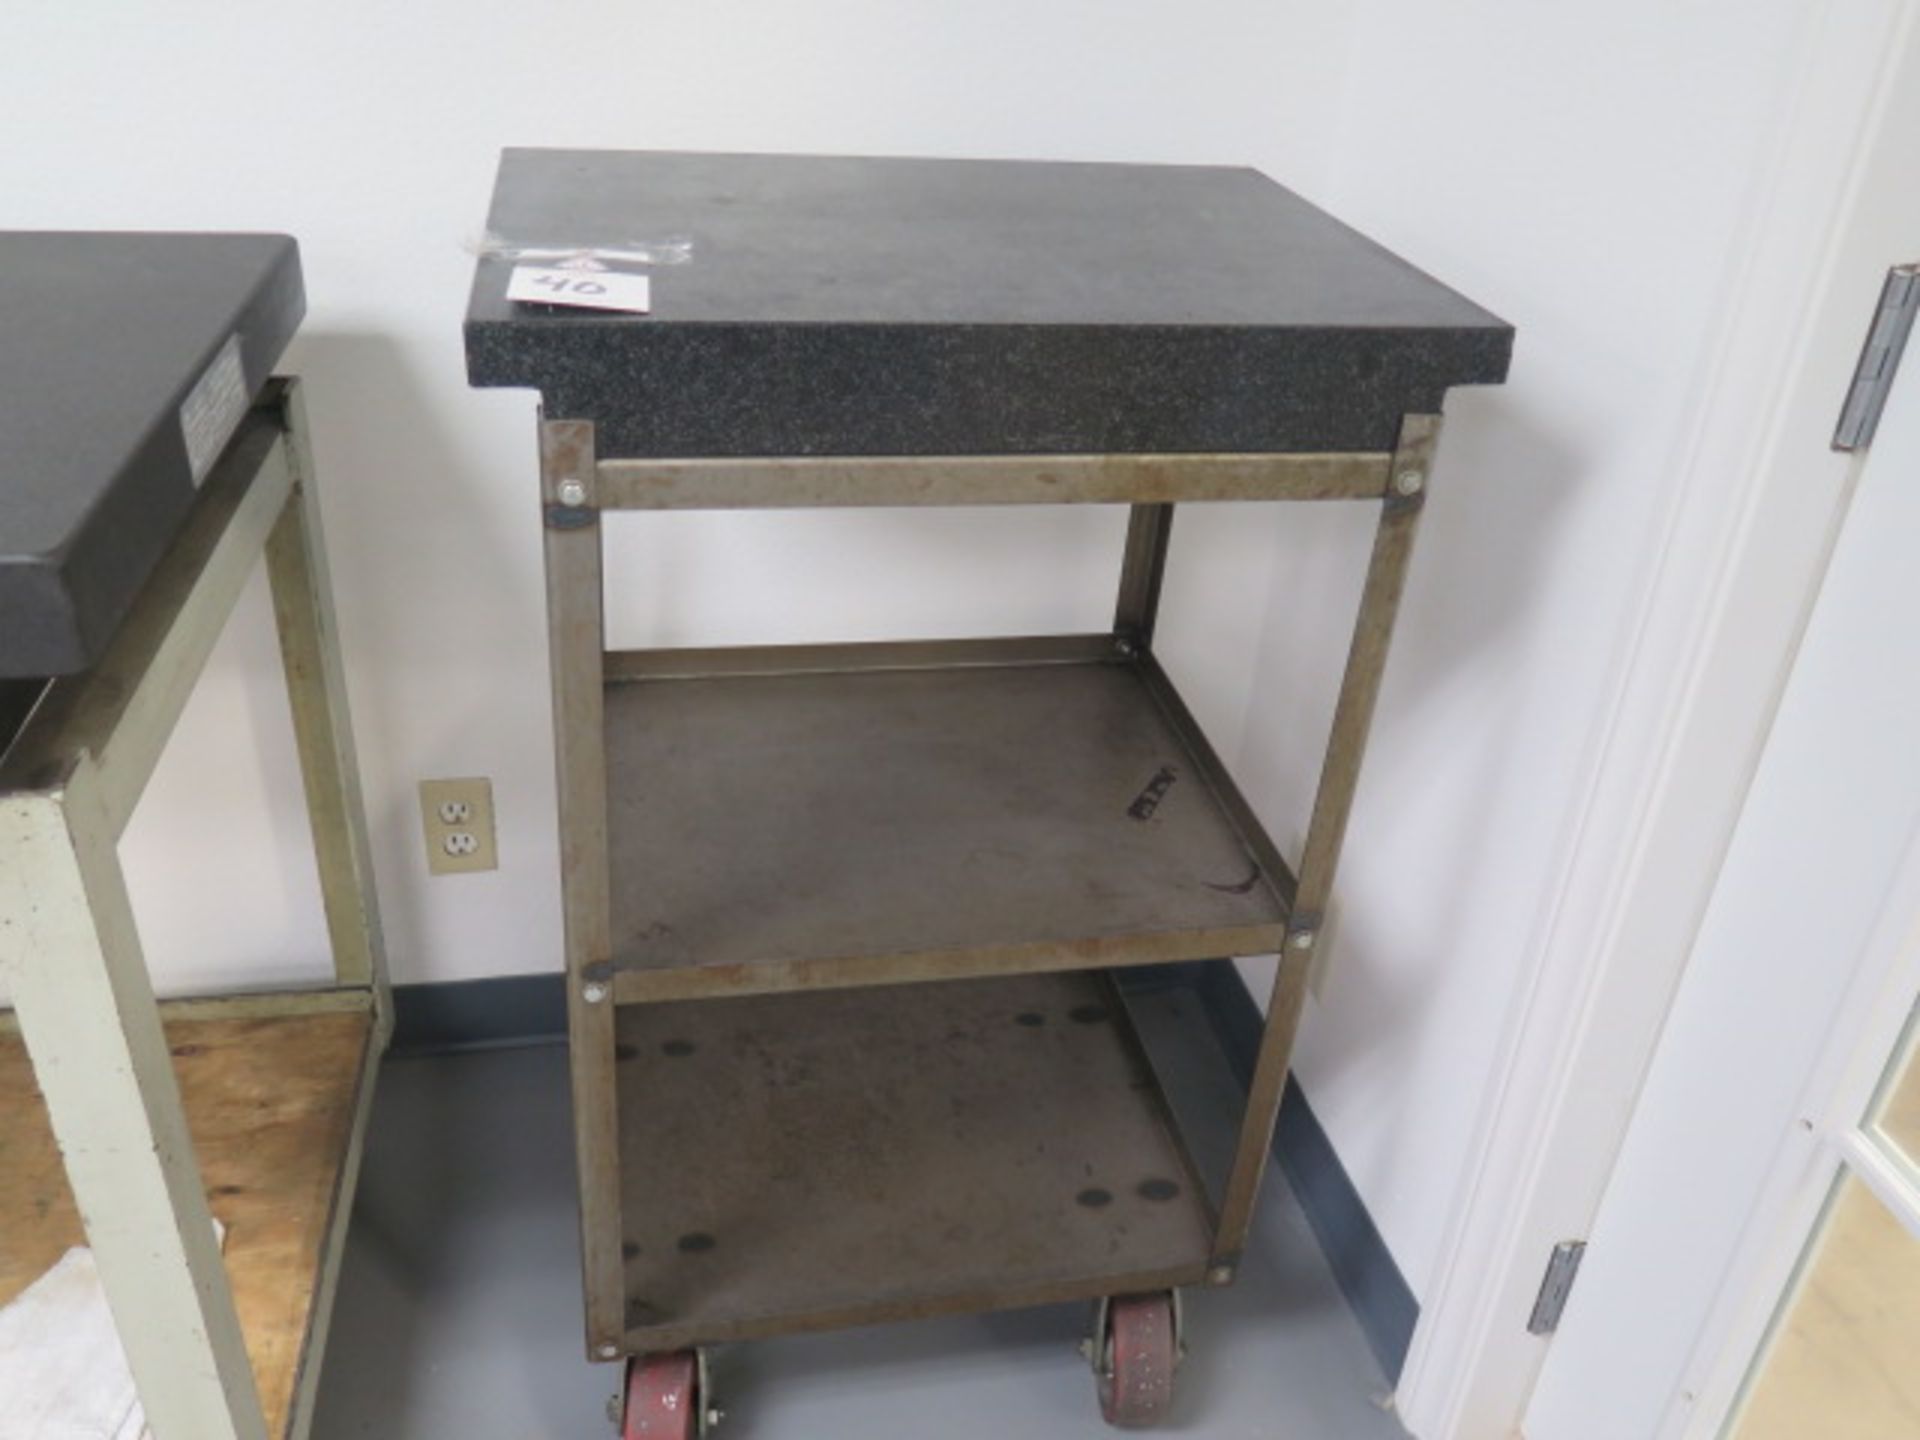 18" x 24" x 4" 2-Ledge Granite Surface Plate w/ Roll Stand (SOLD AS-IS - NO WARRANTY)